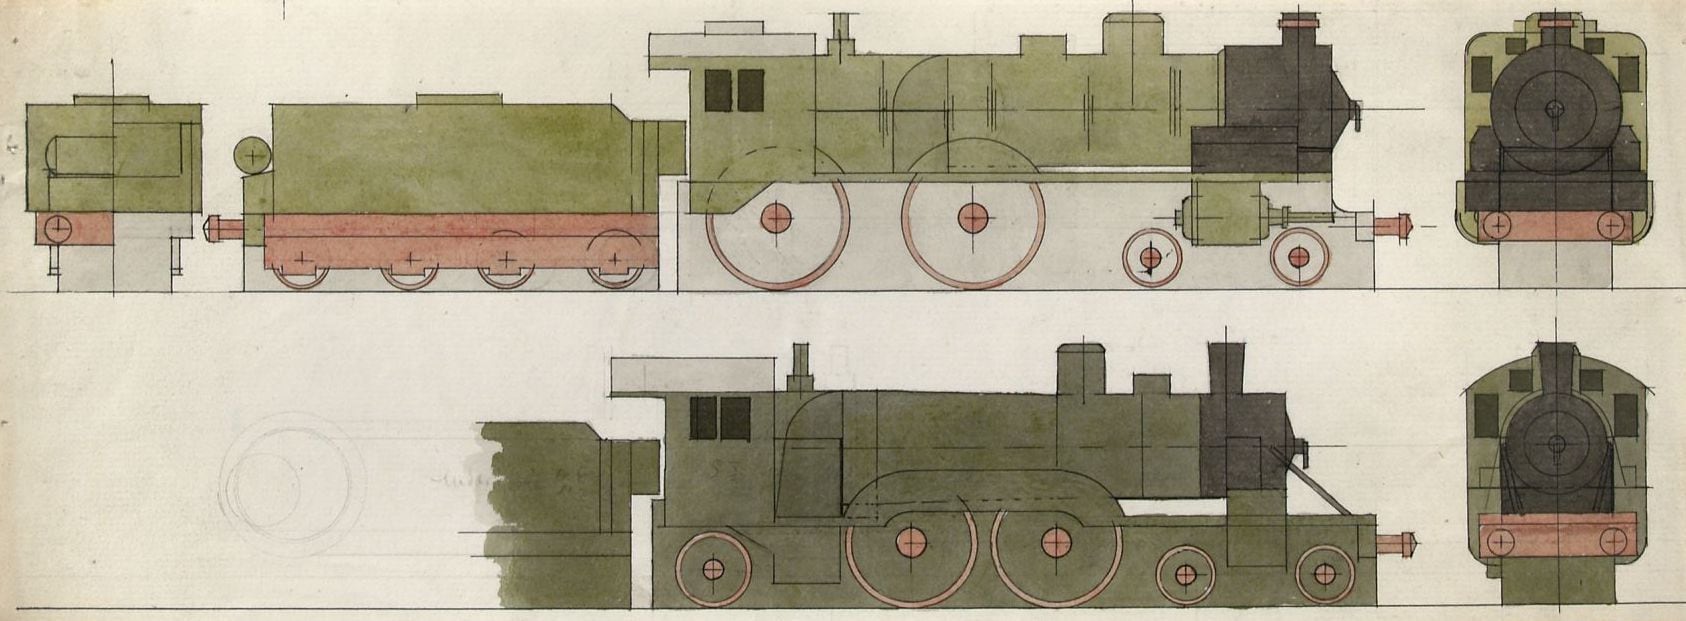 Lyonel Feininger (1871&amp;ndash;1956)

(Profile for Model Train Set, Two Engines), 1914

Watercolor and ink&amp;nbsp;on paper
4 3/4&amp;nbsp;x 13&amp;nbsp;in. (12&amp;nbsp;x 33&amp;nbsp;cm)